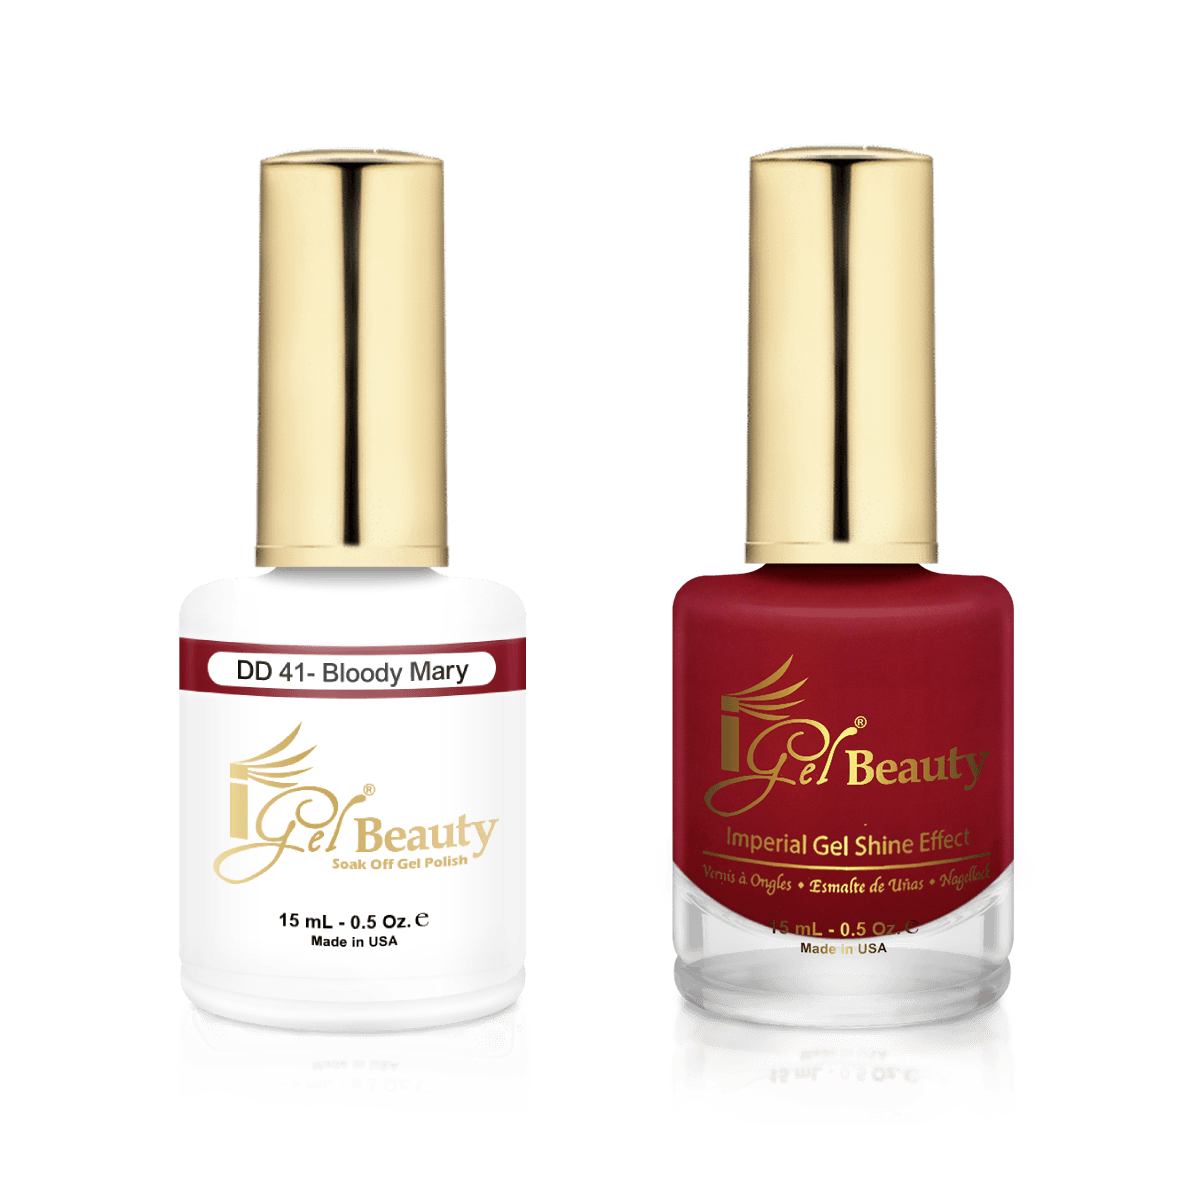 IGel Duo Gel Polish + Matching Nail Lacquer DD 41 BLOODY MARY